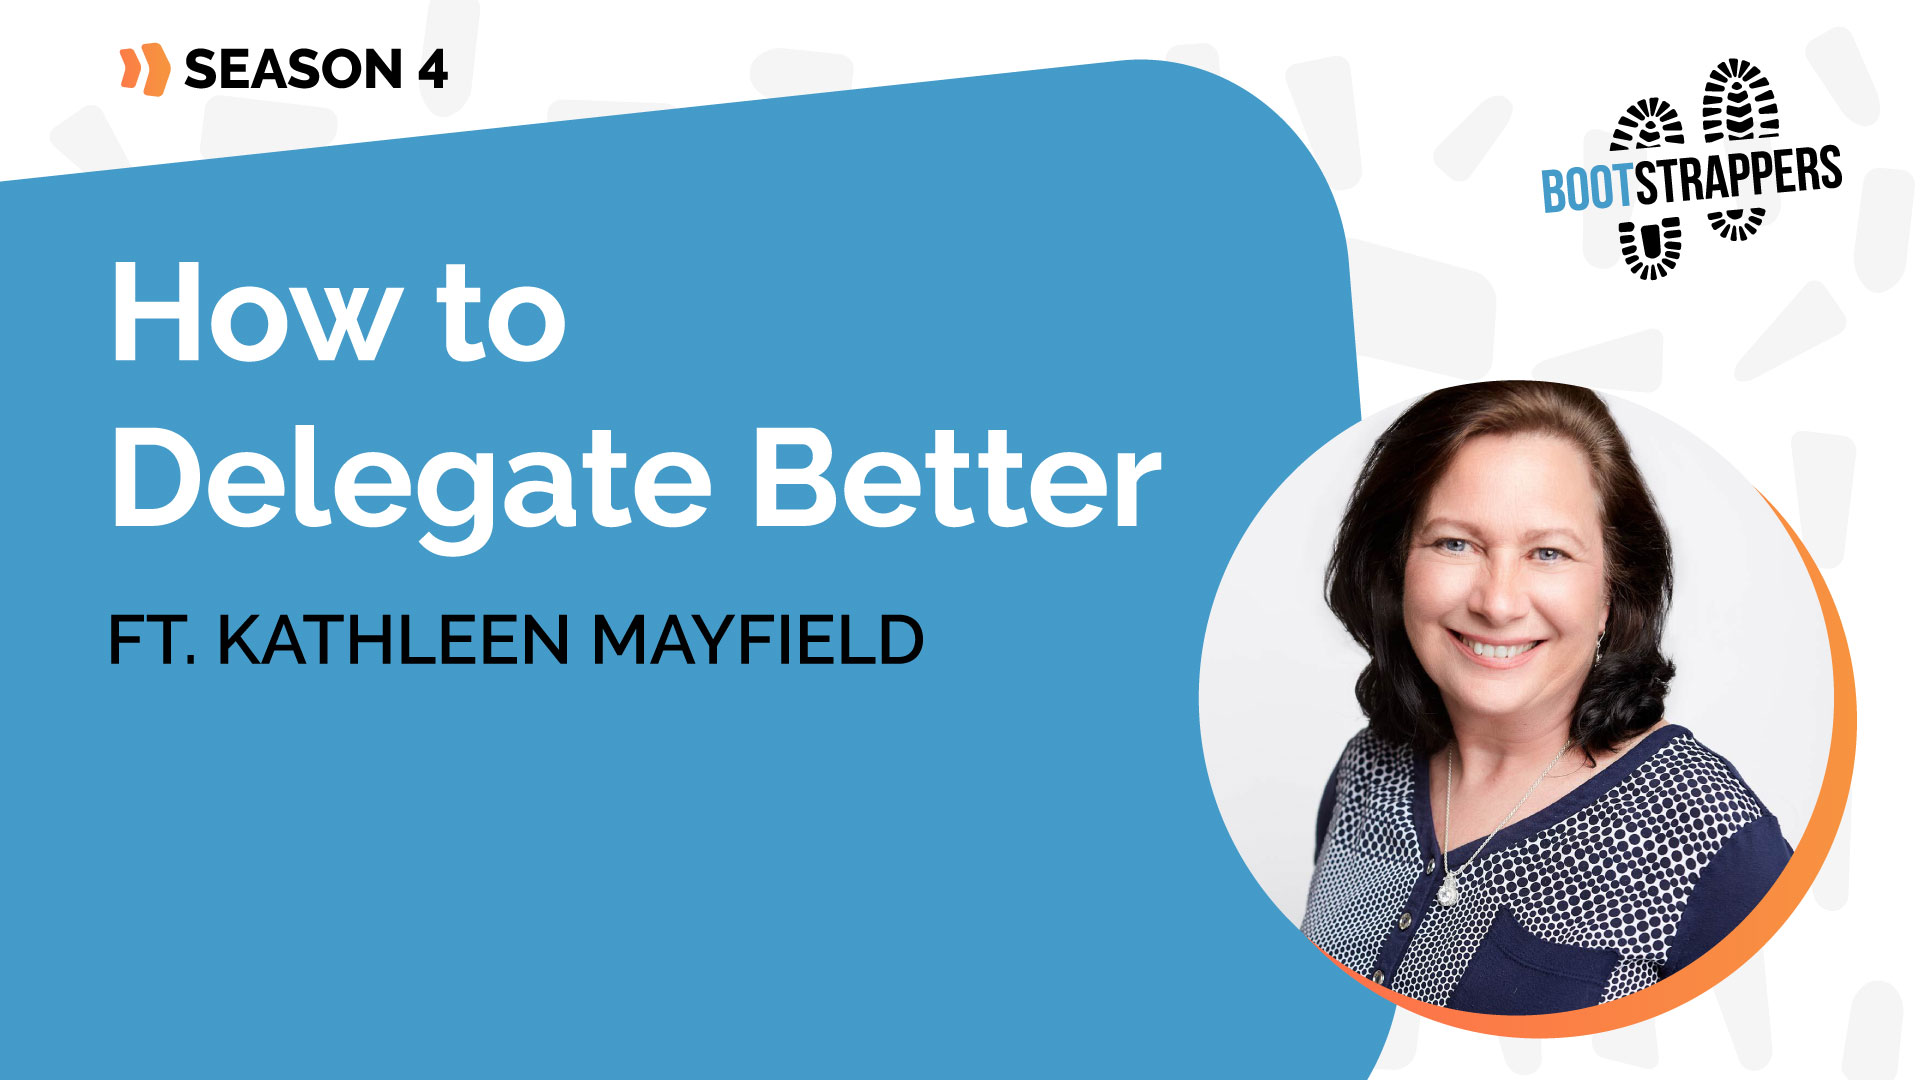 How to Delegate Better